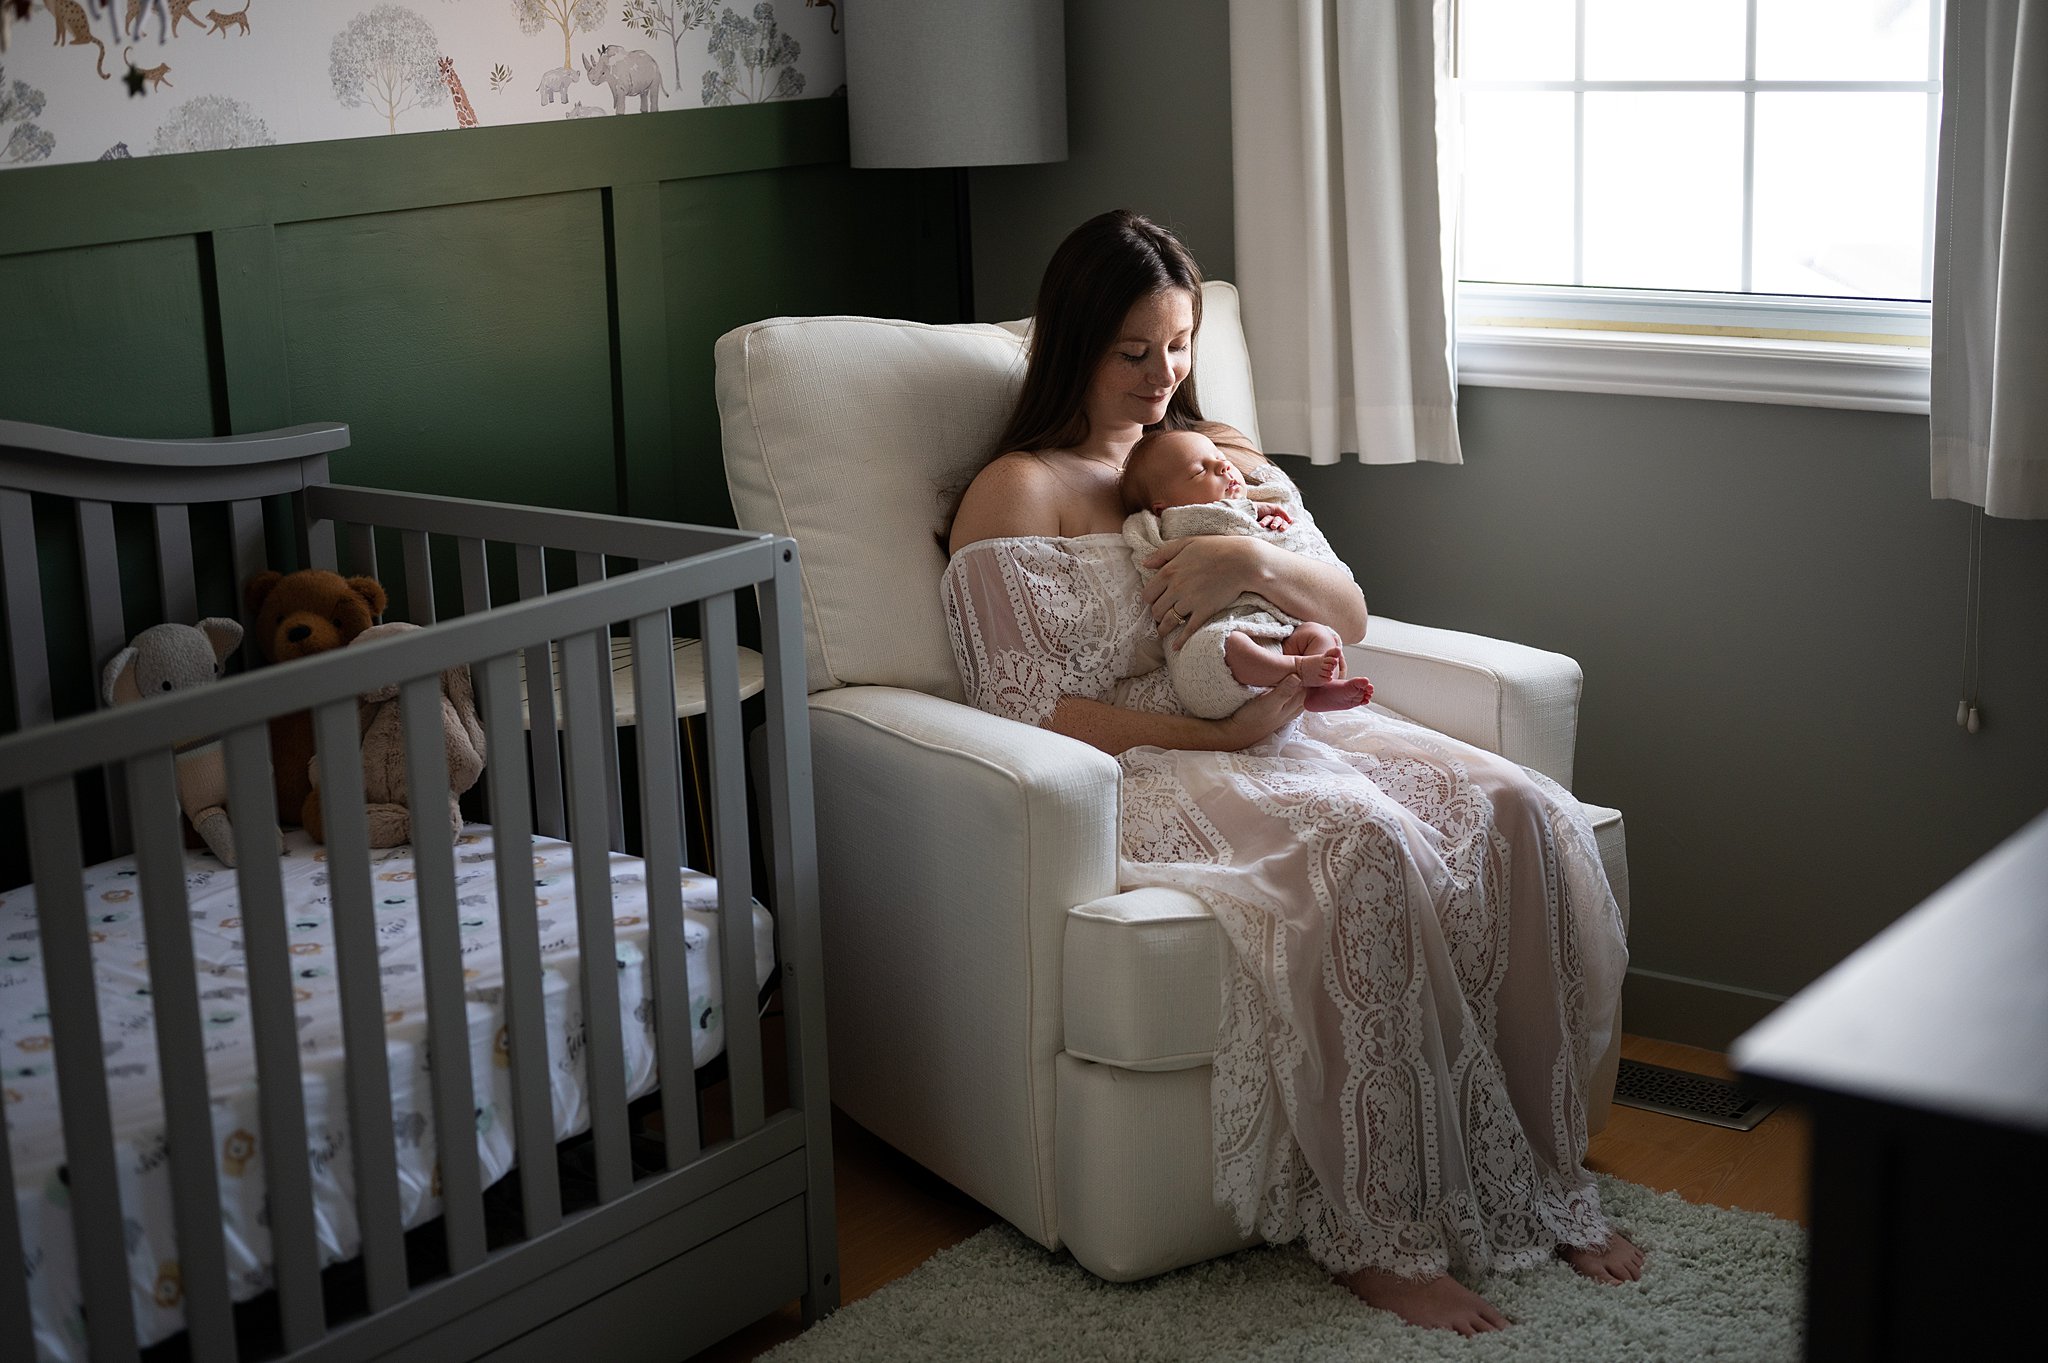 mother in a white lace dress sits in a nursery chair holding newborn under a window